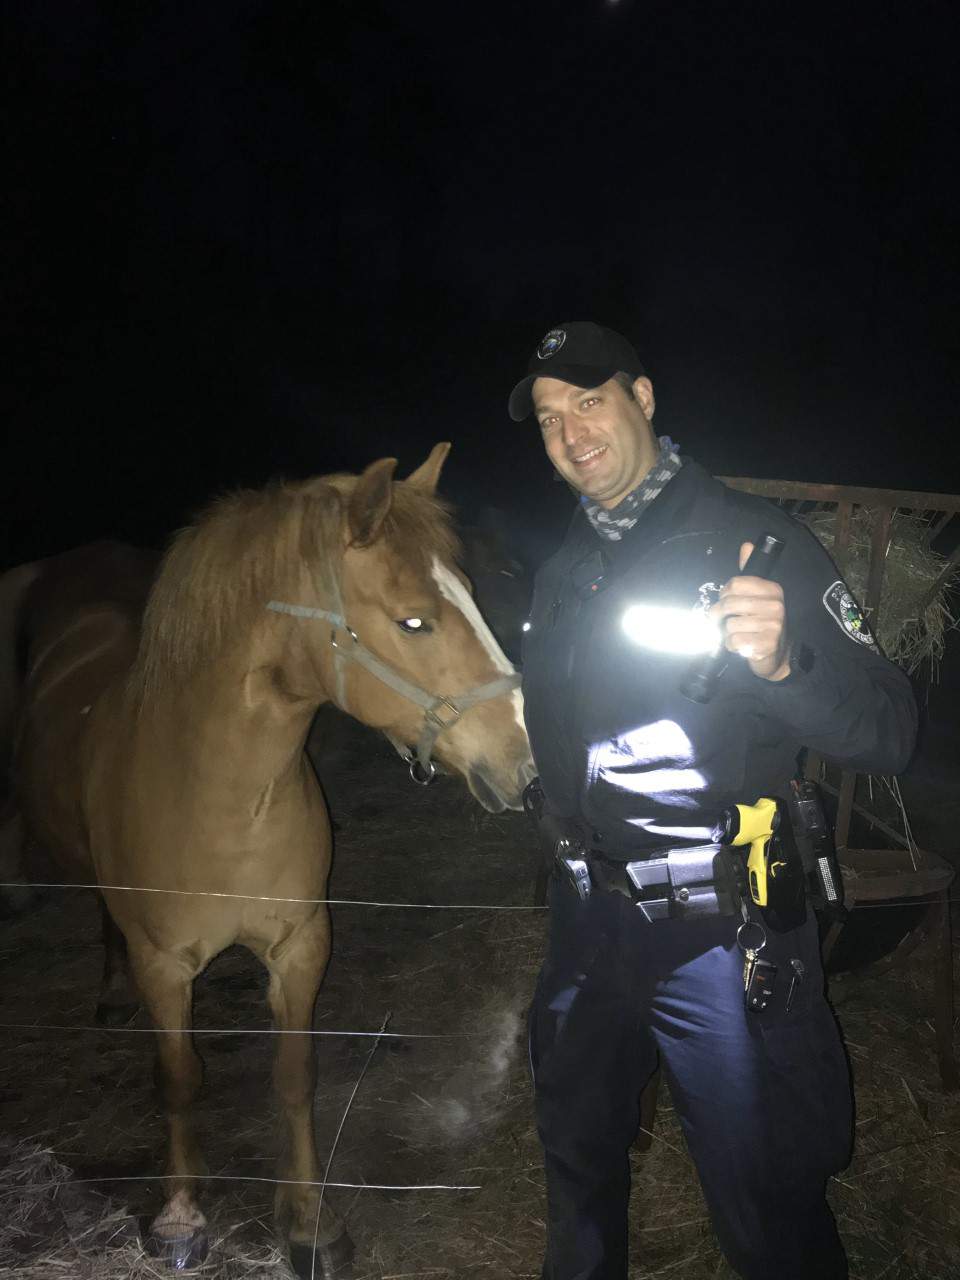 Pasture bedtime? Police return horse found standing in road in West Bloomfield